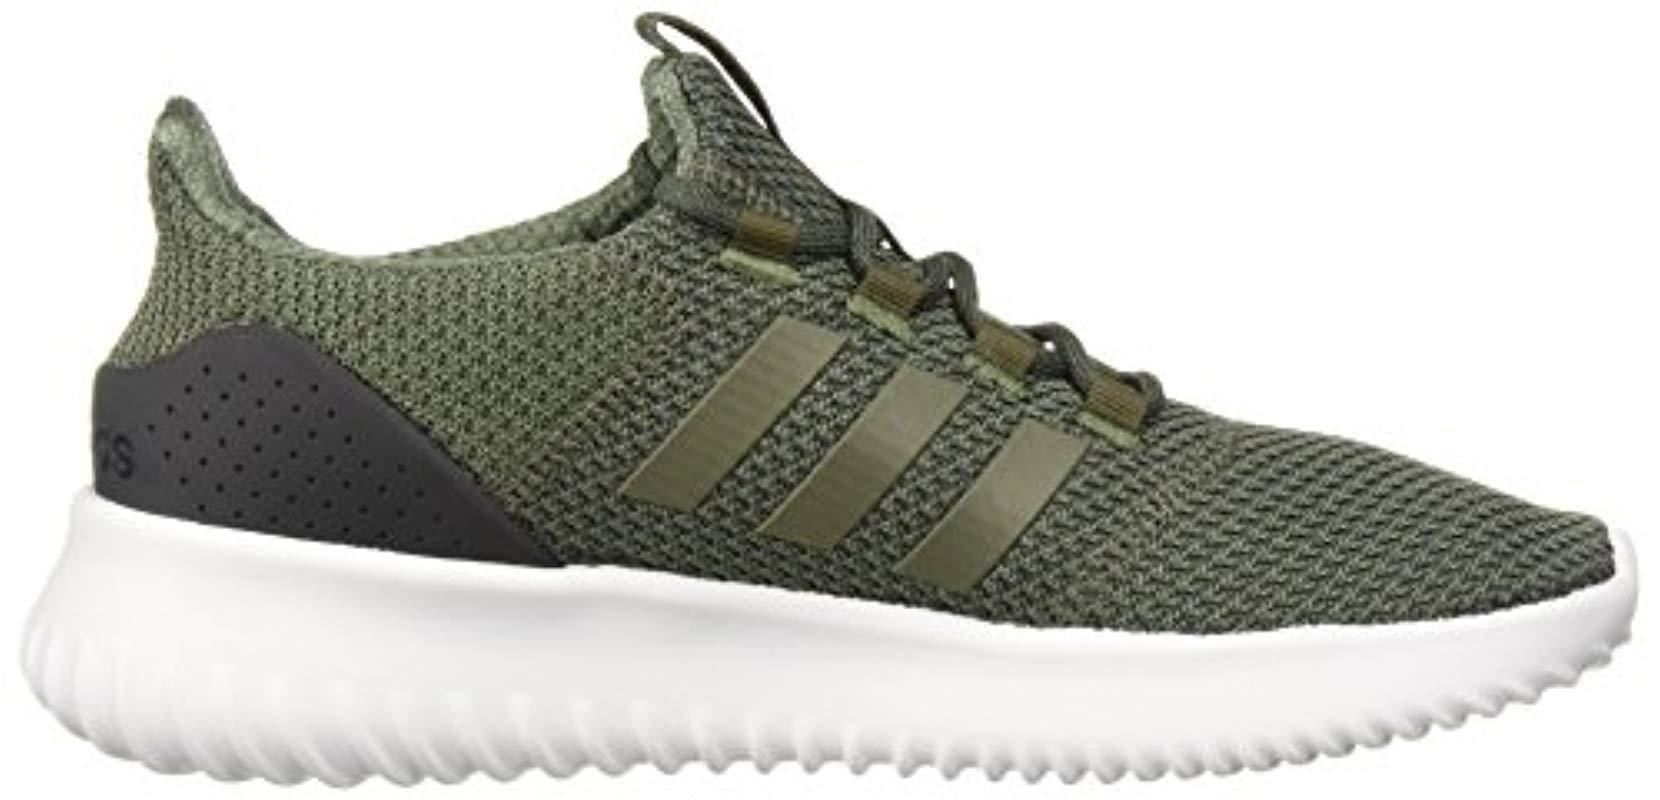 adidas Cloudfoam Ultimate Running Shoe in Green for Men - Lyst